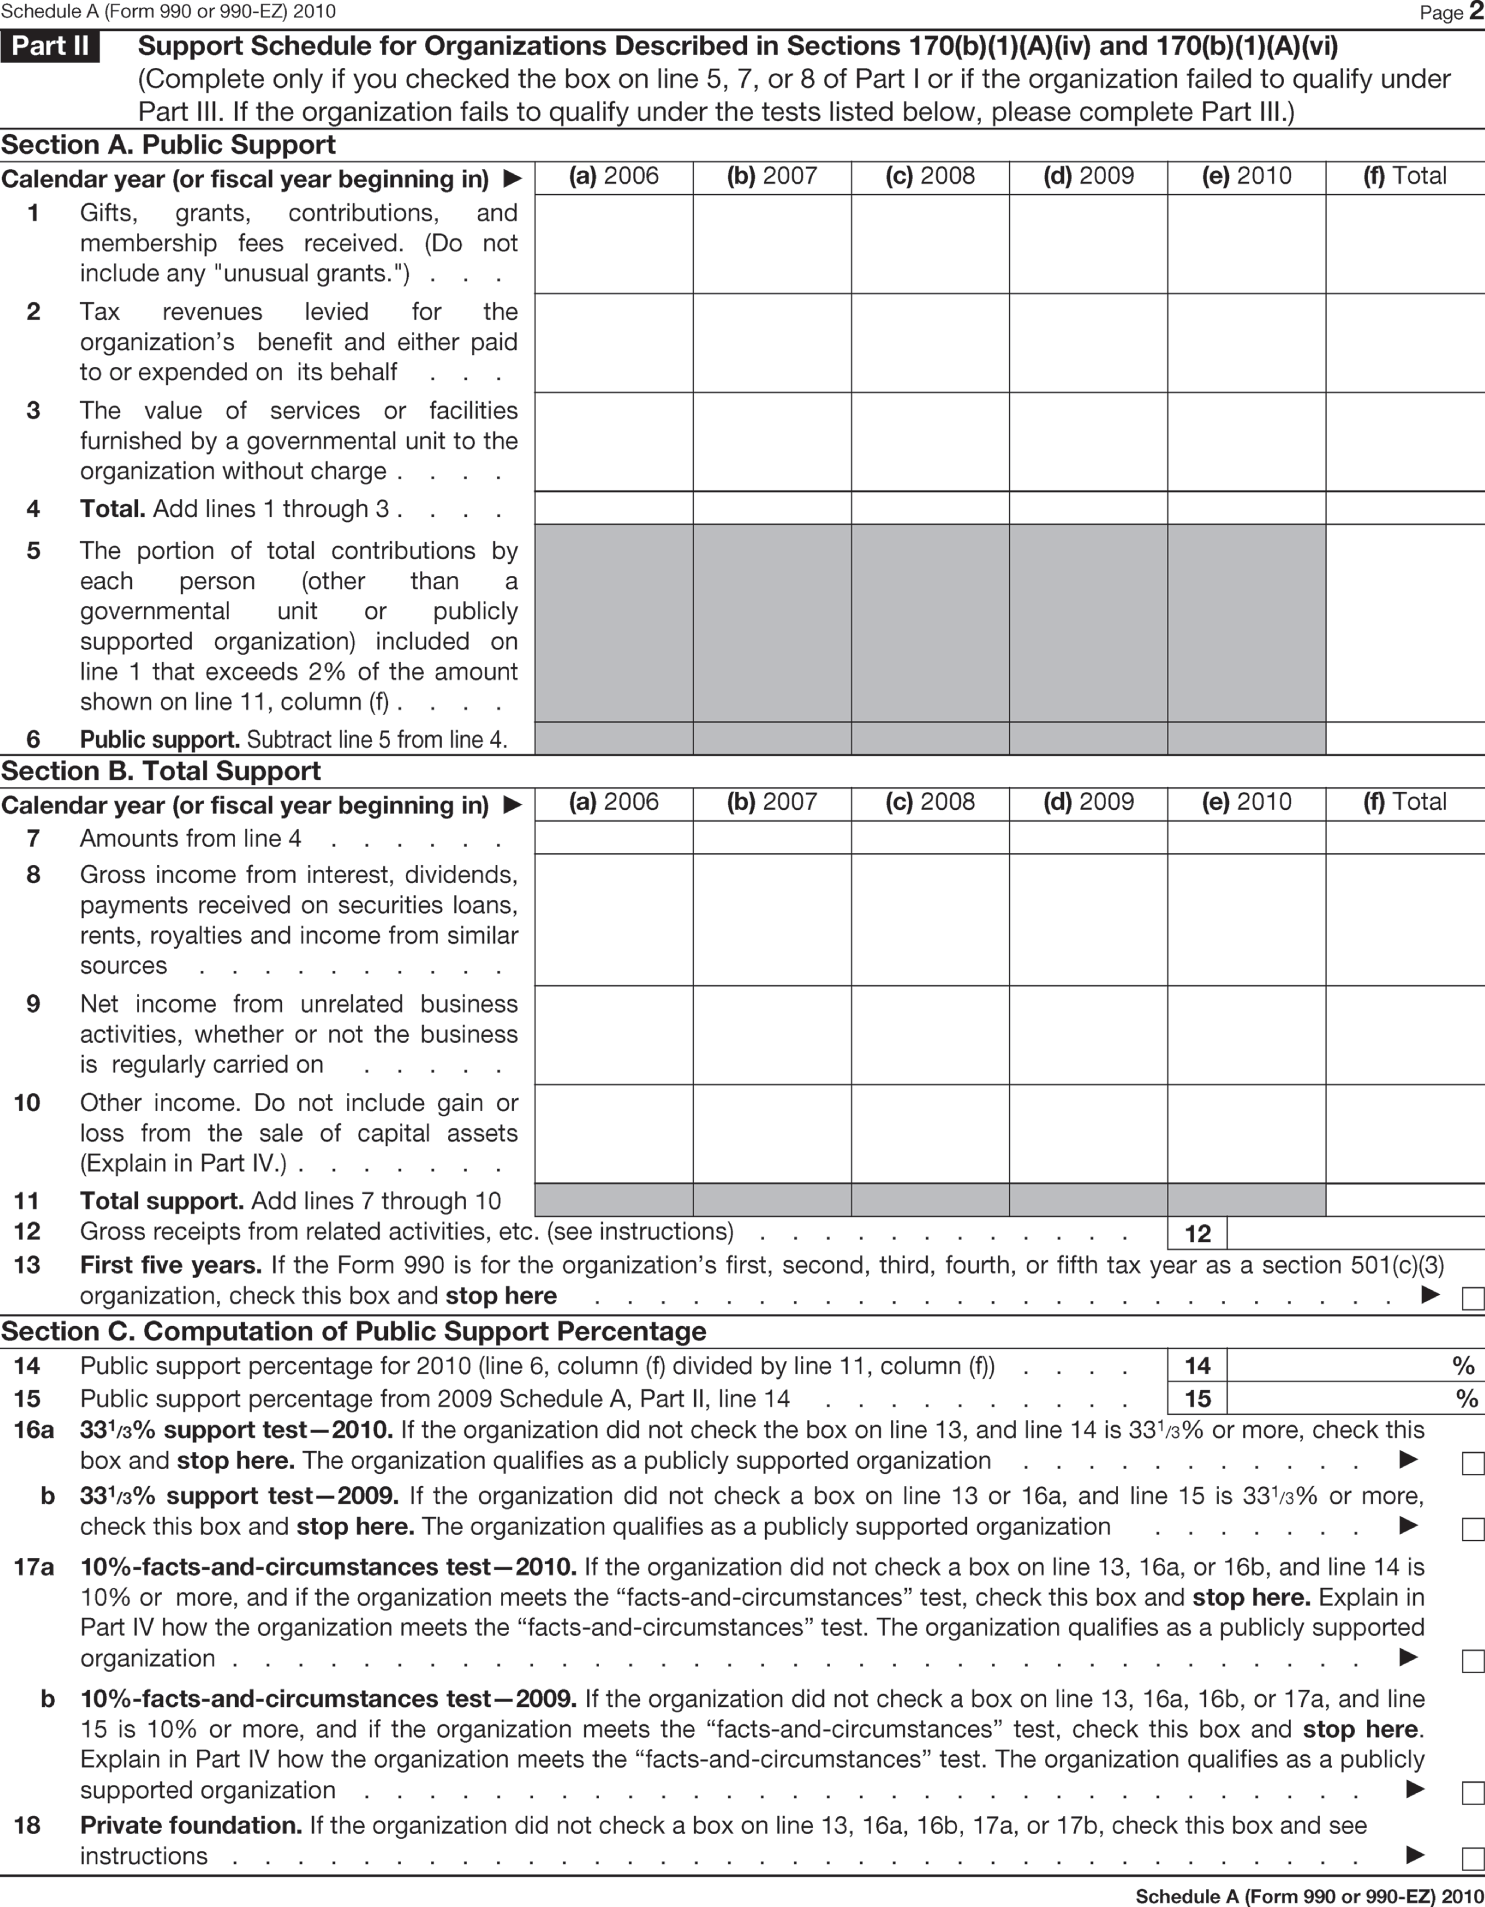 Illustration of Form 990 Schedule A presenting the rules and regulations of “Public Charity Status and Public Support” - Part II.